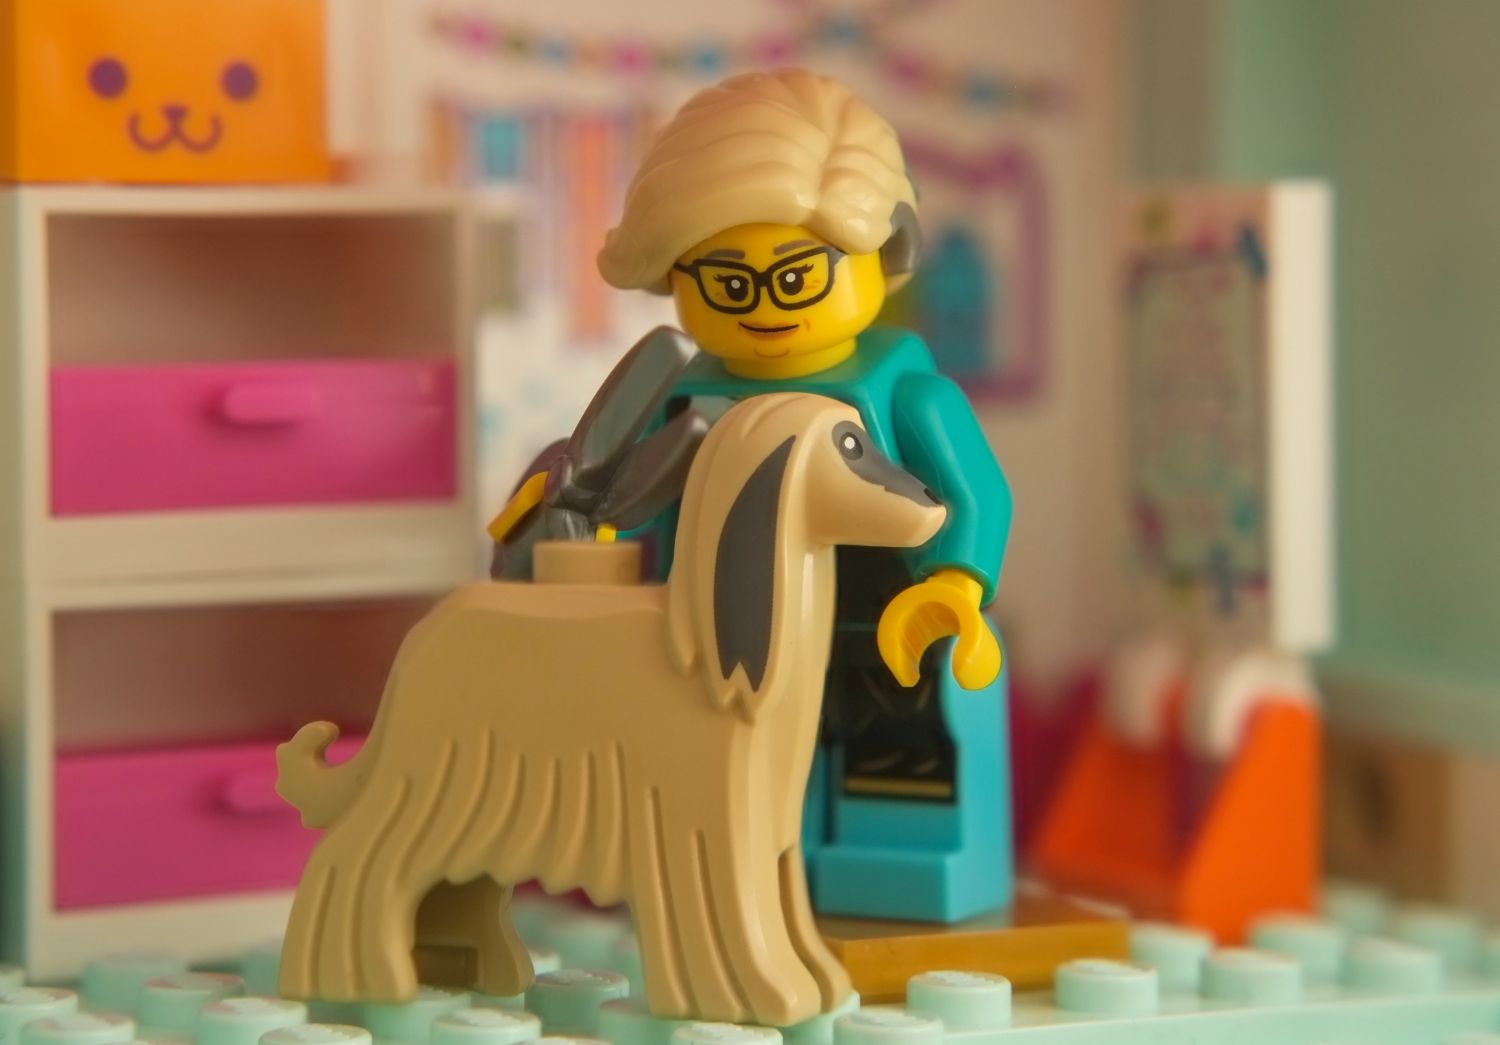 LEGO pet groomer with LEGO Afghan Hound and scissors